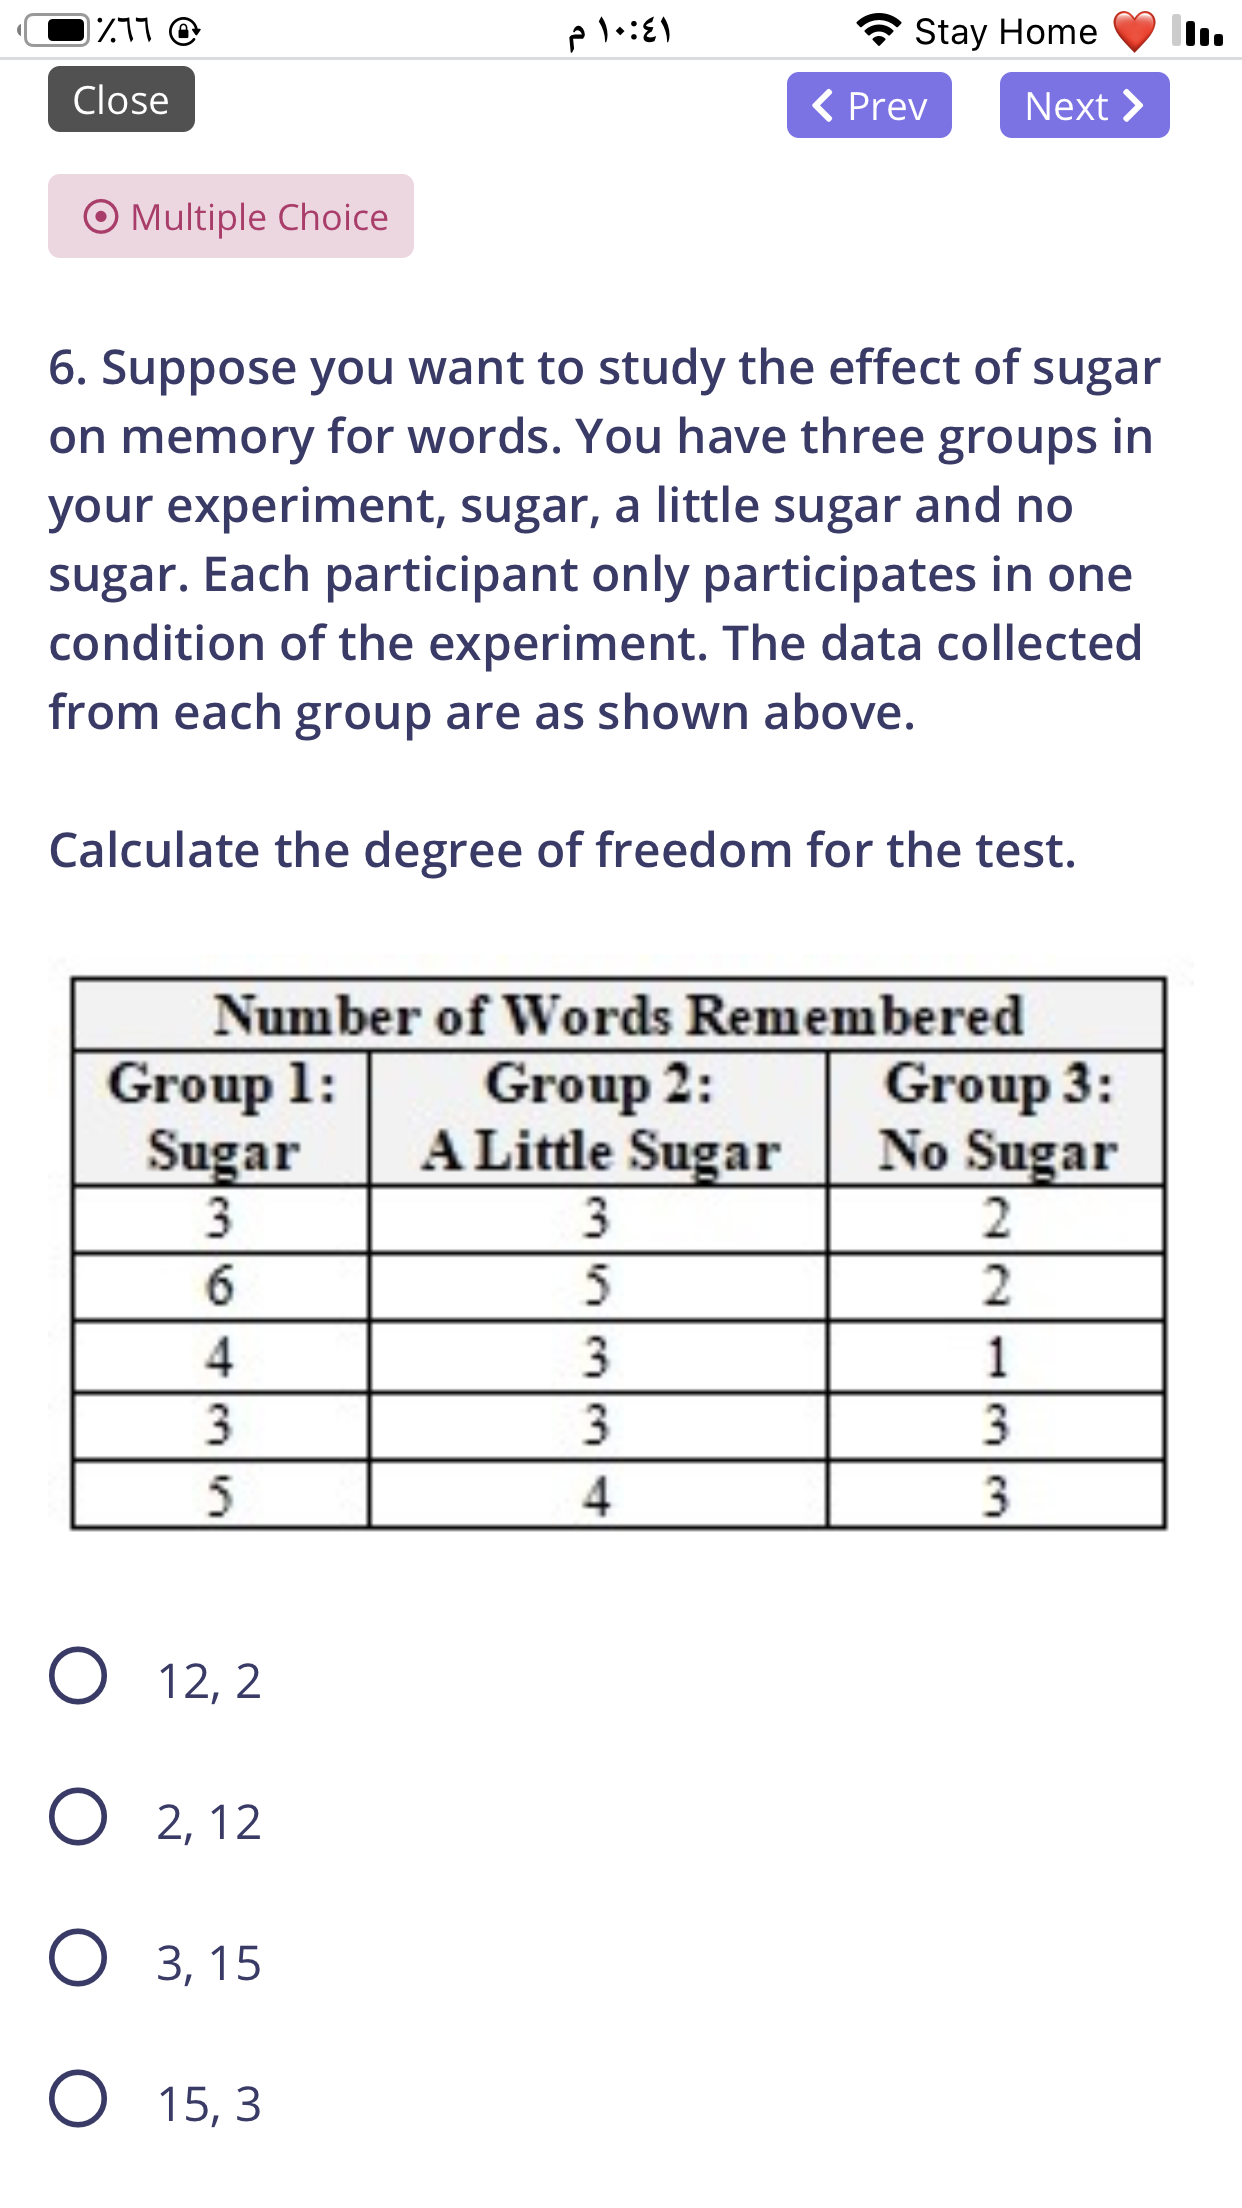 6. Suppose you want to study the effect of sugar
on memory for words. You have three groups in
your experiment, sugar, a little sugar and no
sugar. Each participant only participates in one
condition of the experiment. The data collected
from each group are as shown above.
Calculate the degree of freedom for the test.
Number of Words Remembered
Group 1:
Sugar
3
Group 2:
A Little Sugar
3.
5
Group 3:
No Sugar
6.
3
1
3
3
3
5
4
3.
О 12, 2
О 2,12
О з, 15
O 15, 3
